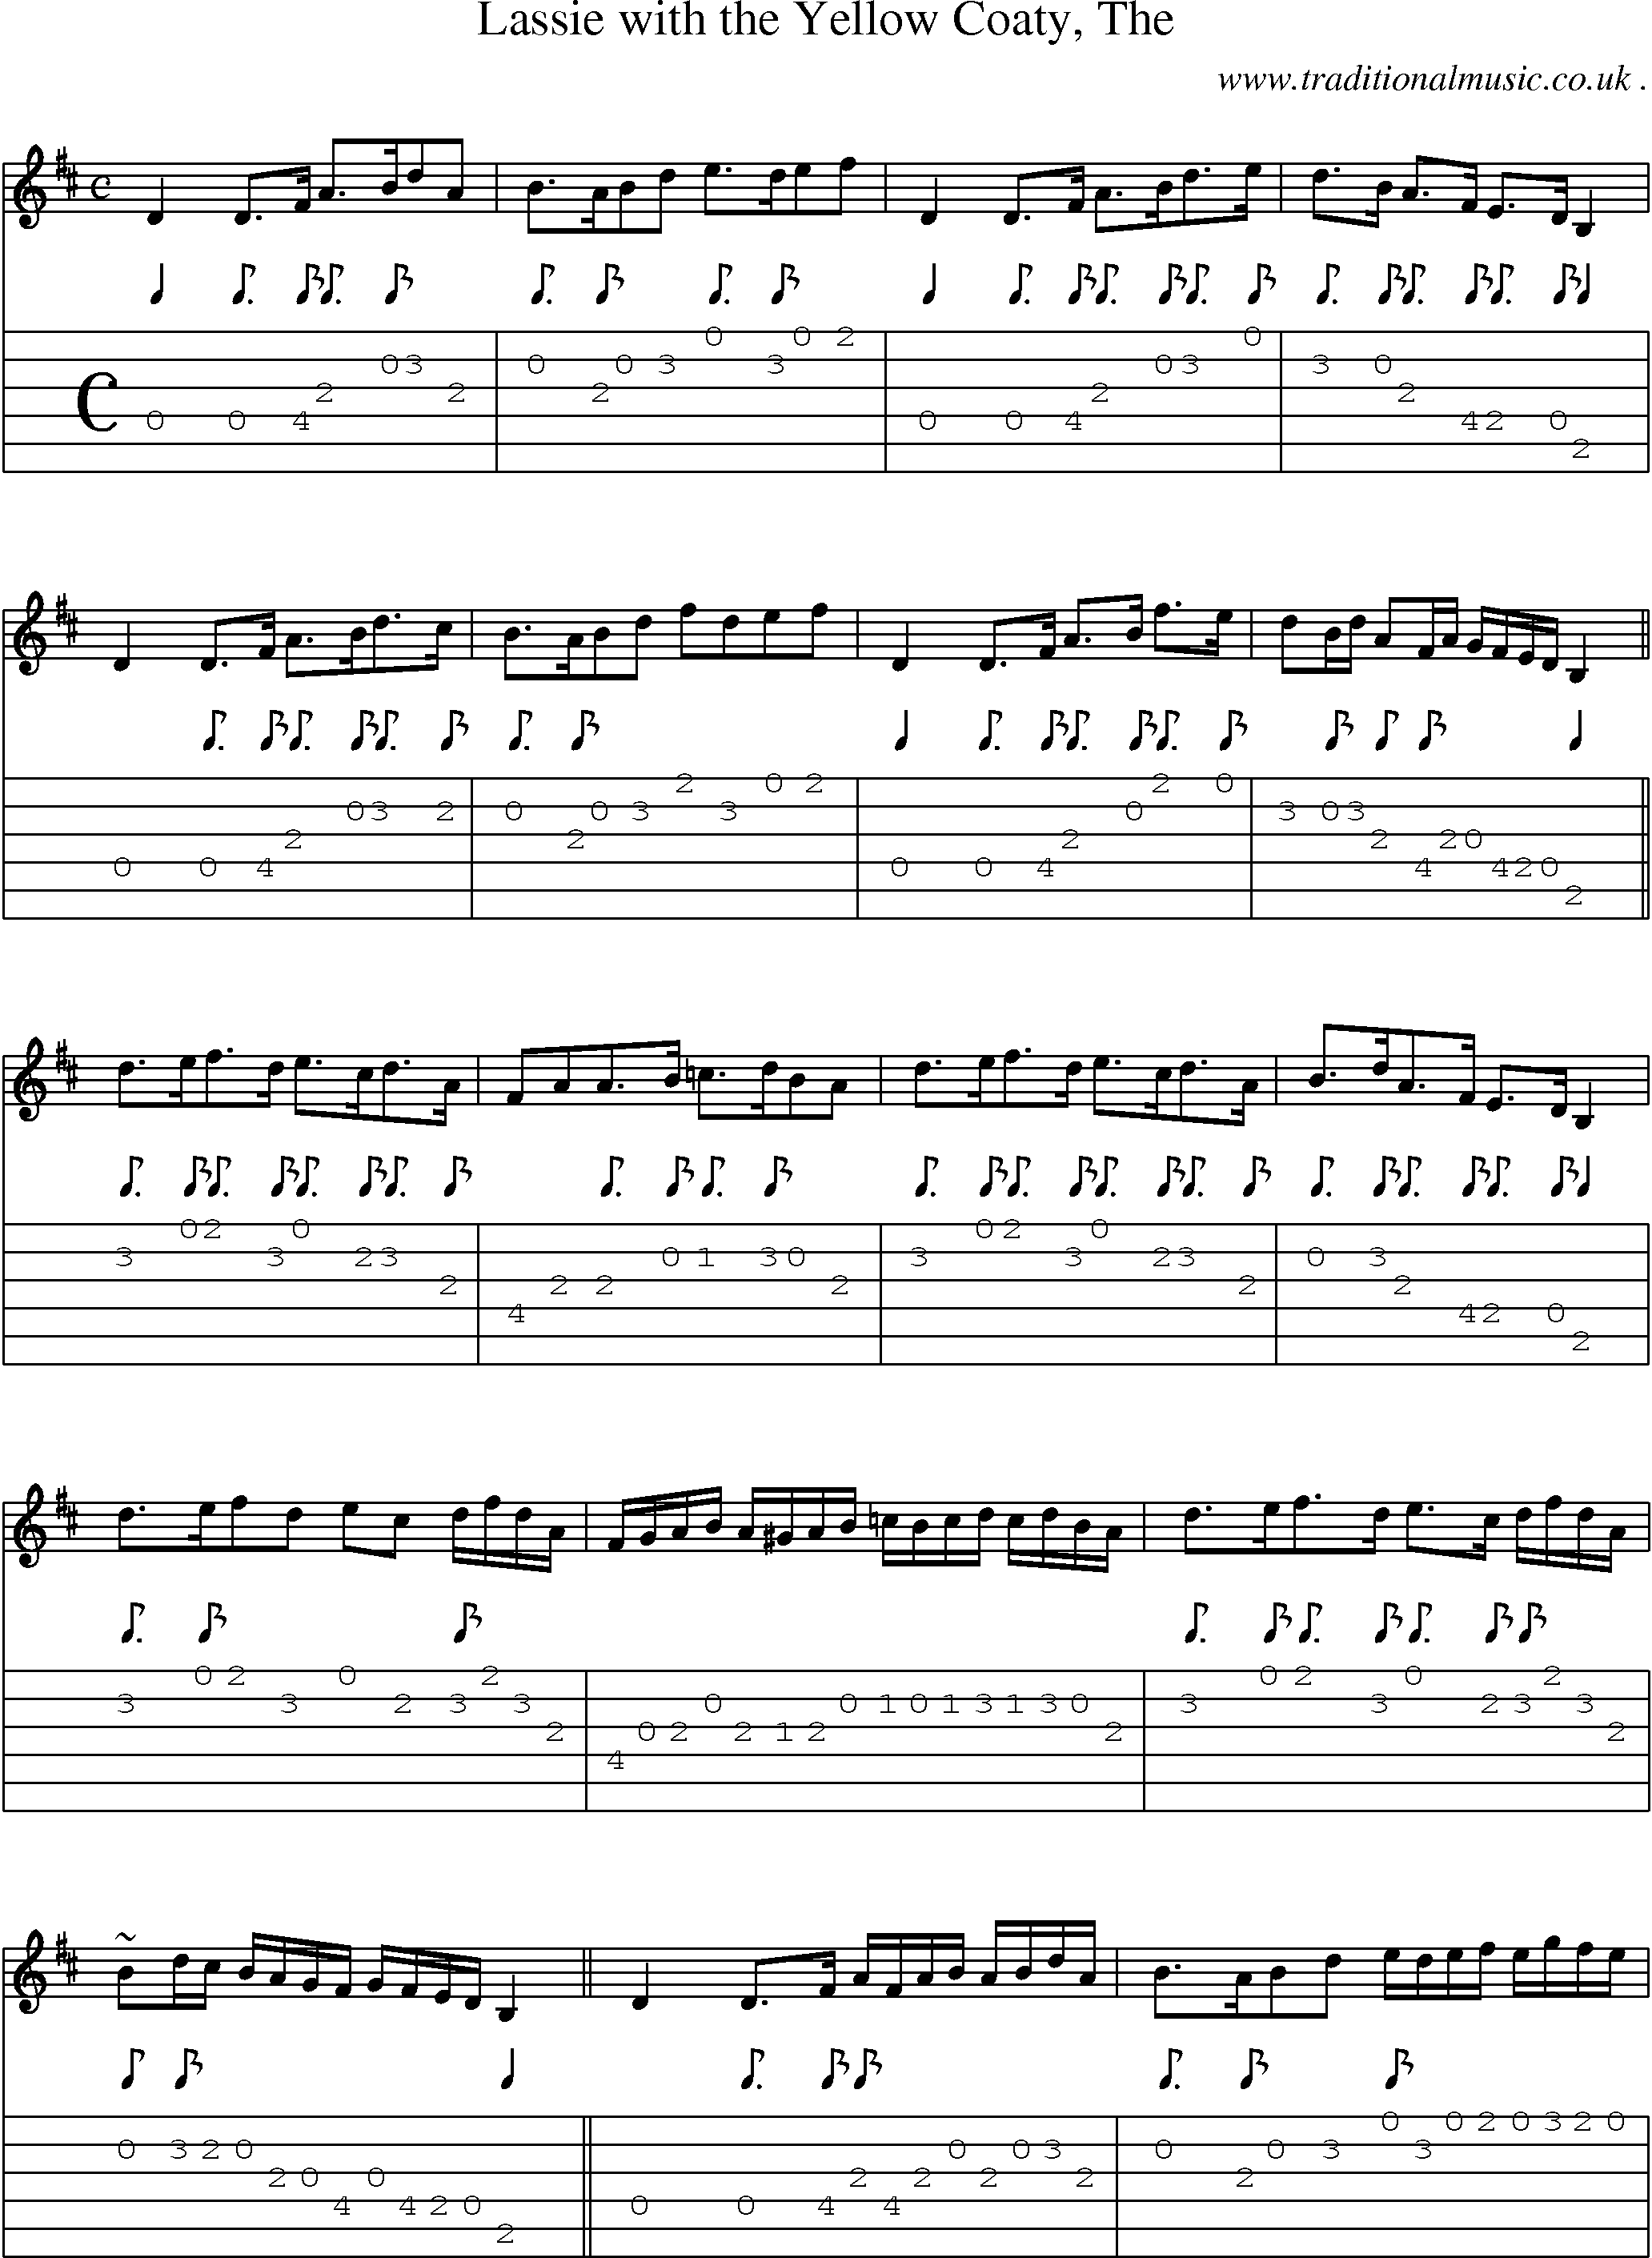 Sheet-music  score, Chords and Guitar Tabs for Lassie With The Yellow Coaty The